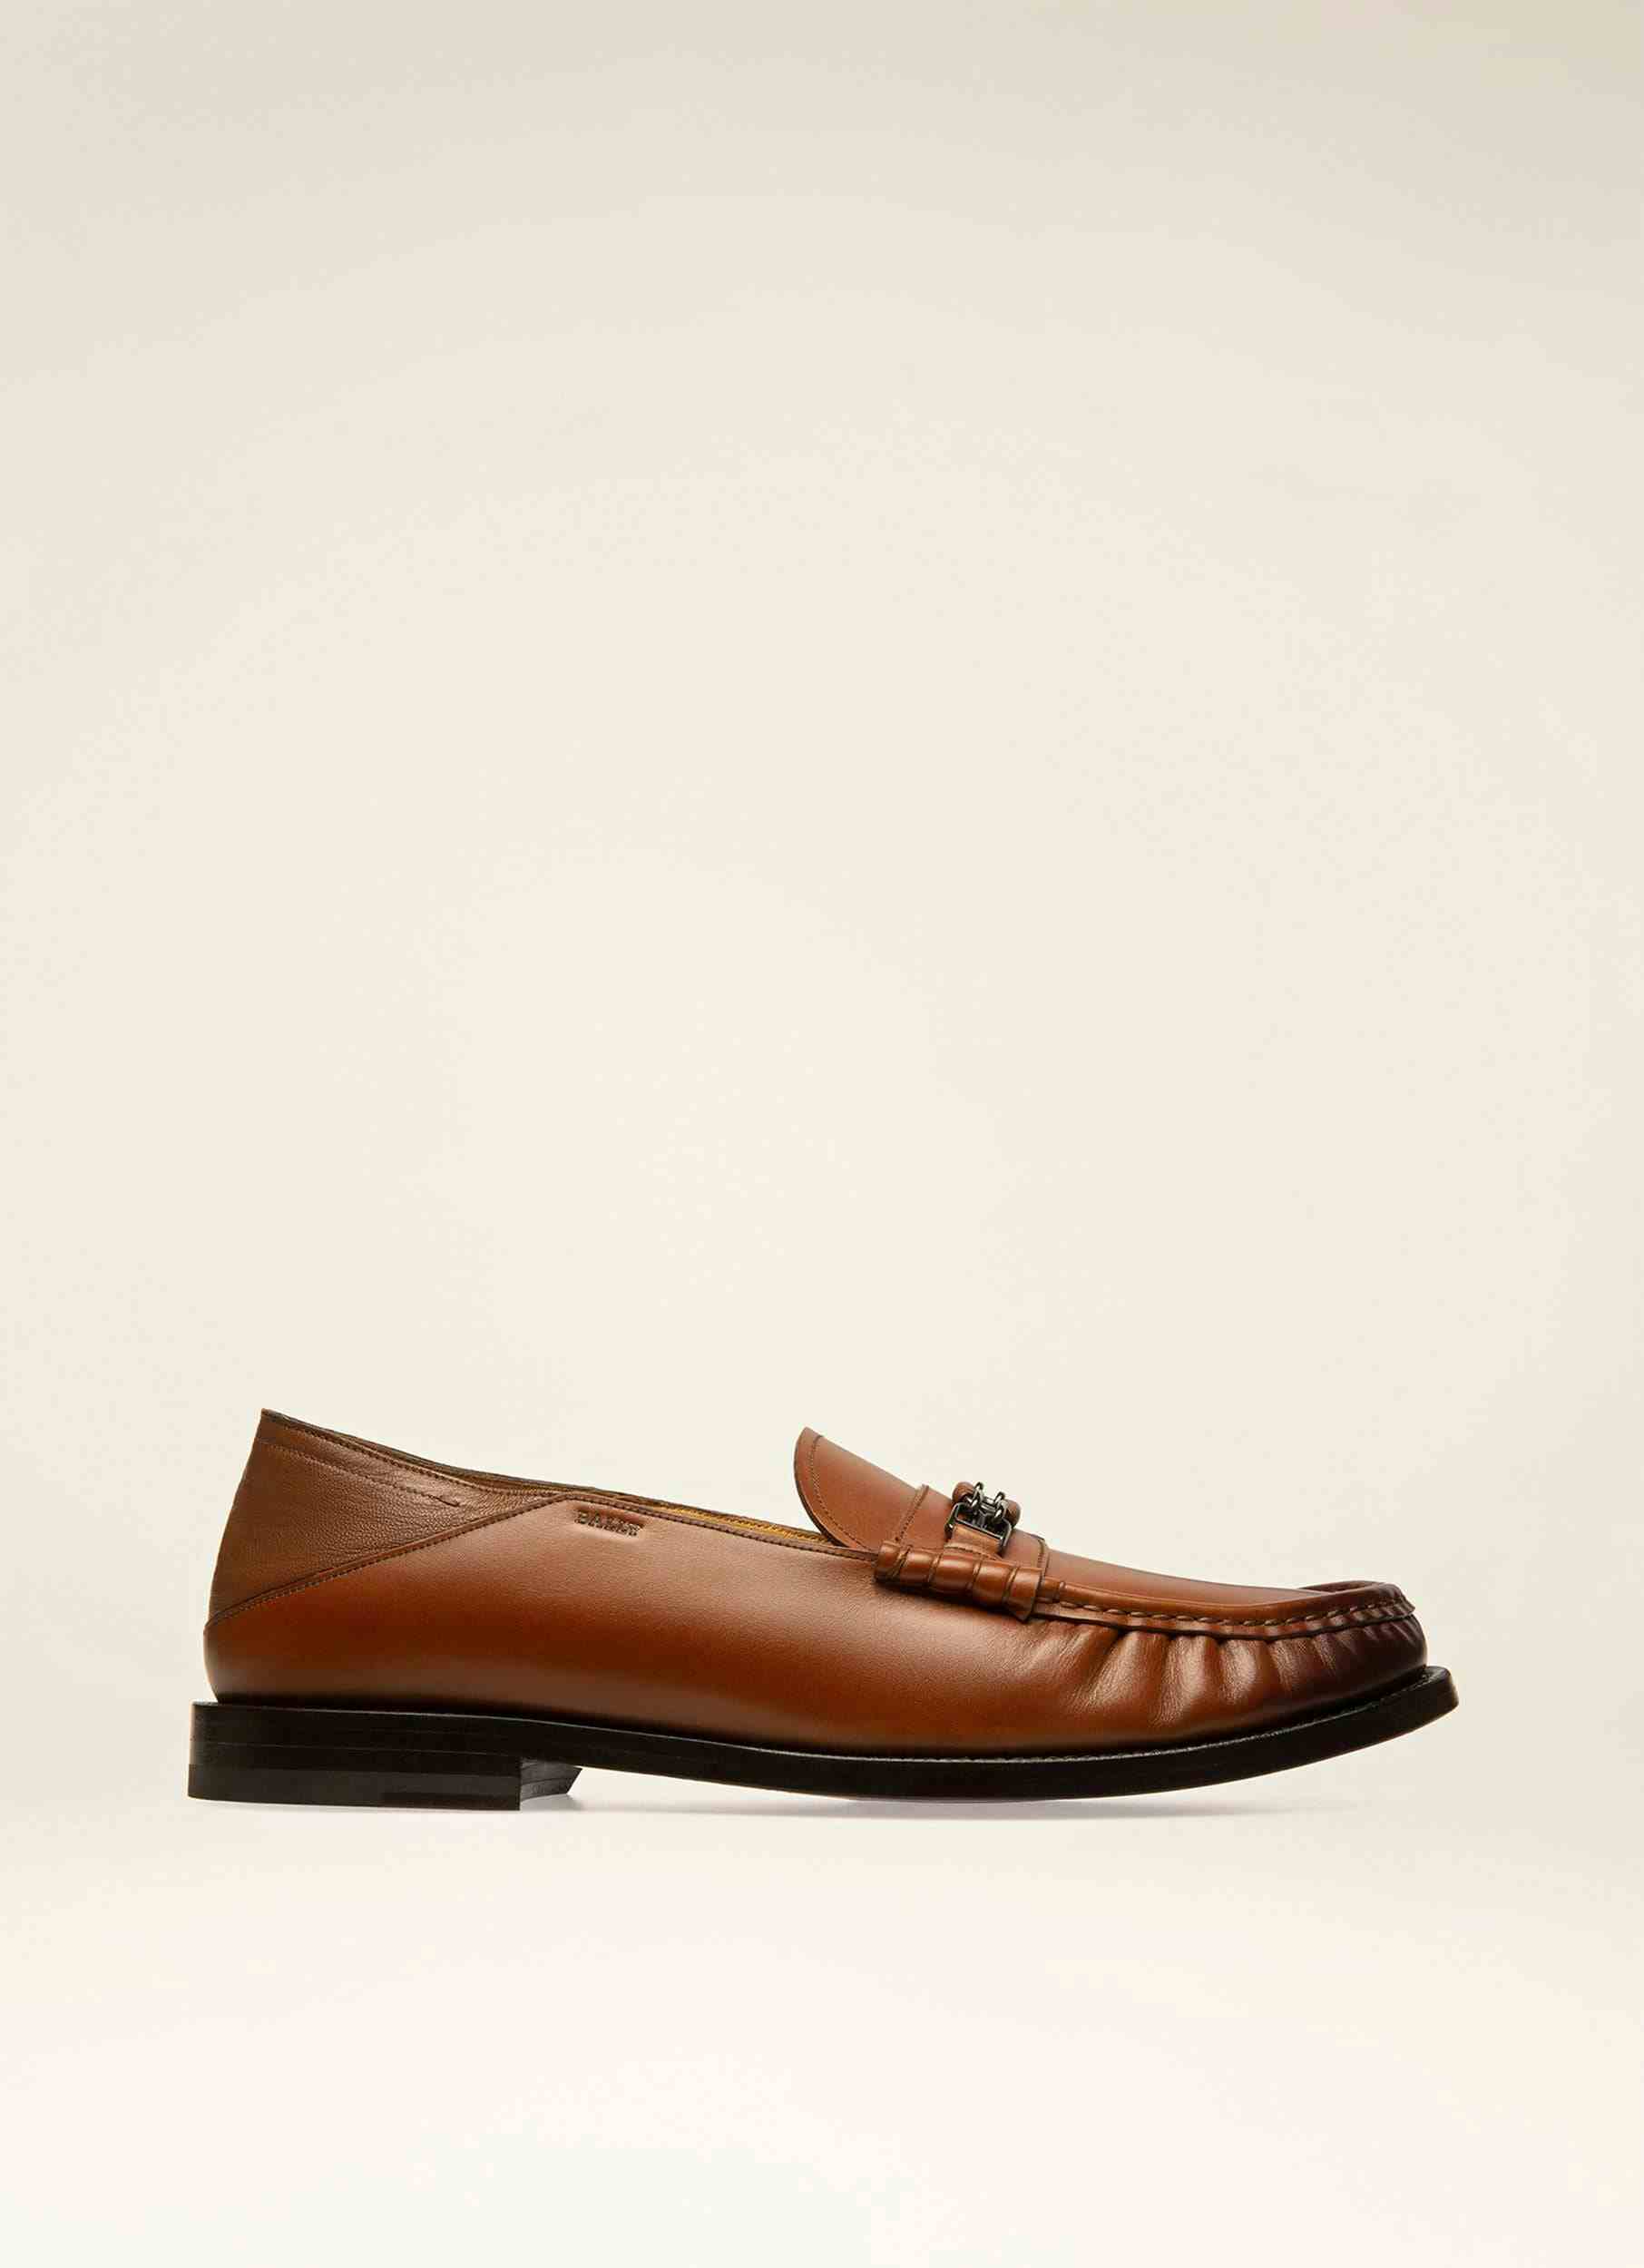 Coriano Leather Moccasins In Brown - Men's - Bally